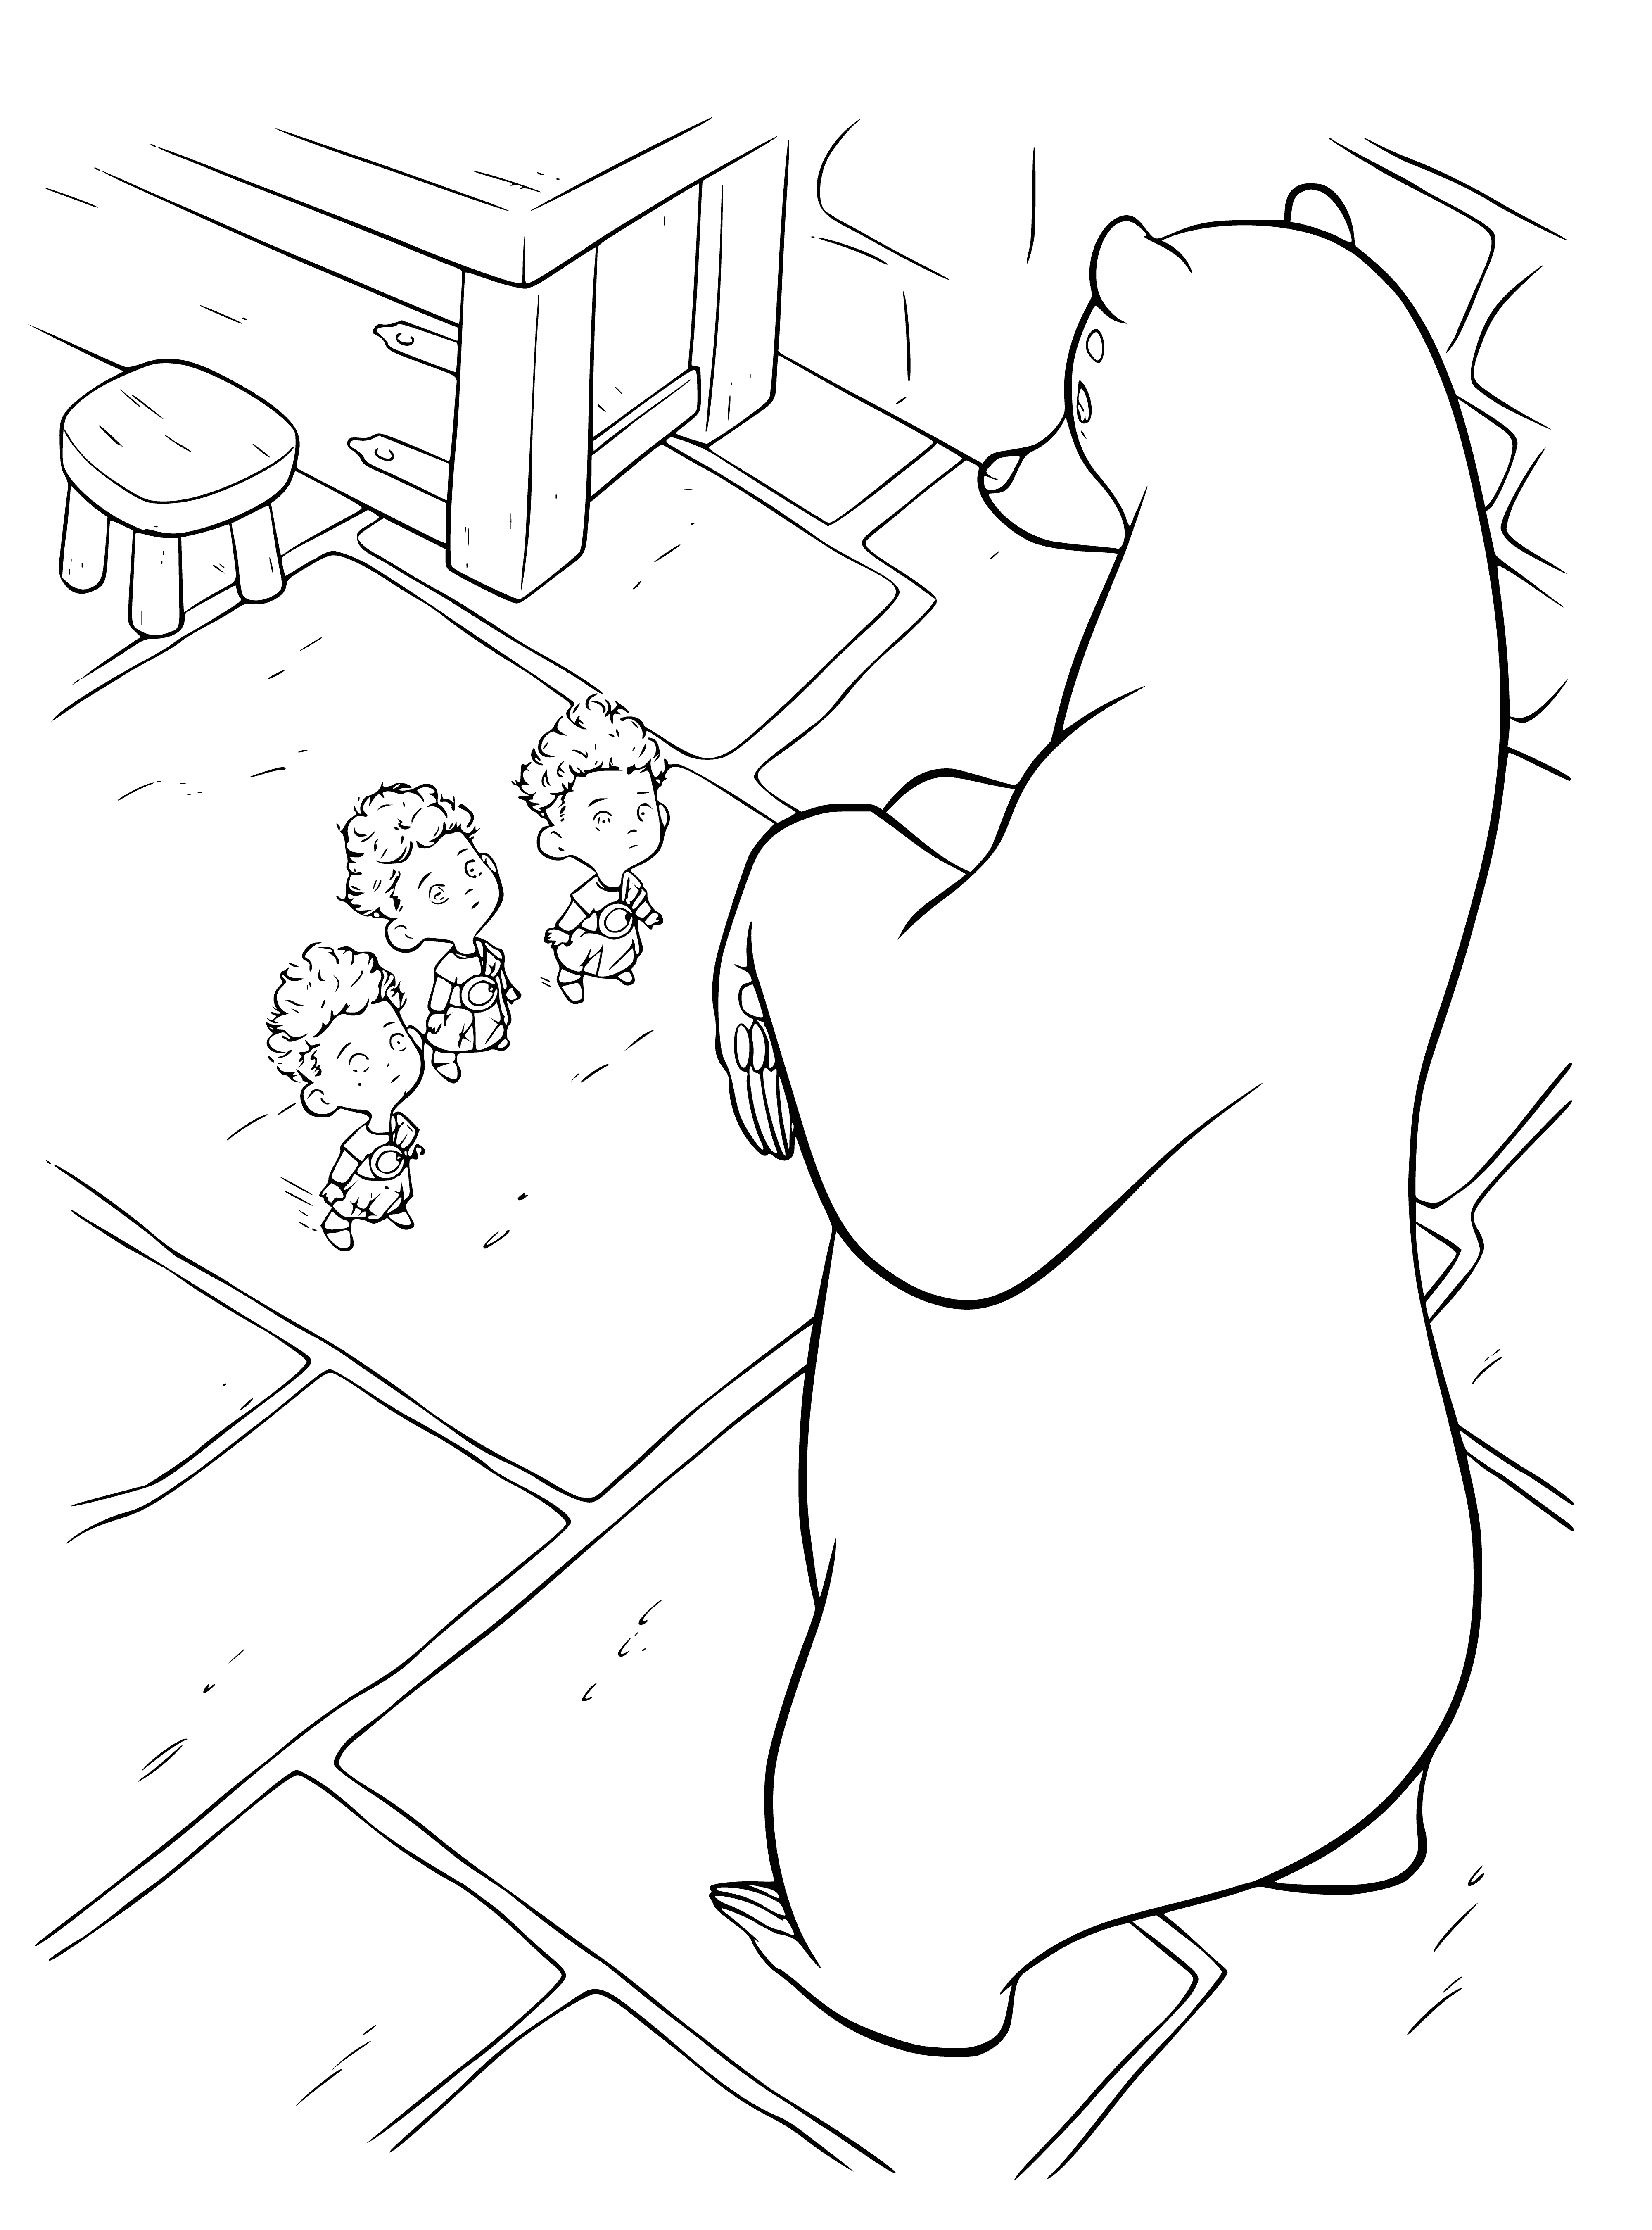 coloring page: She-bear encounters 3 inquisitive boys in woods, looking friendly as they ask her questions.